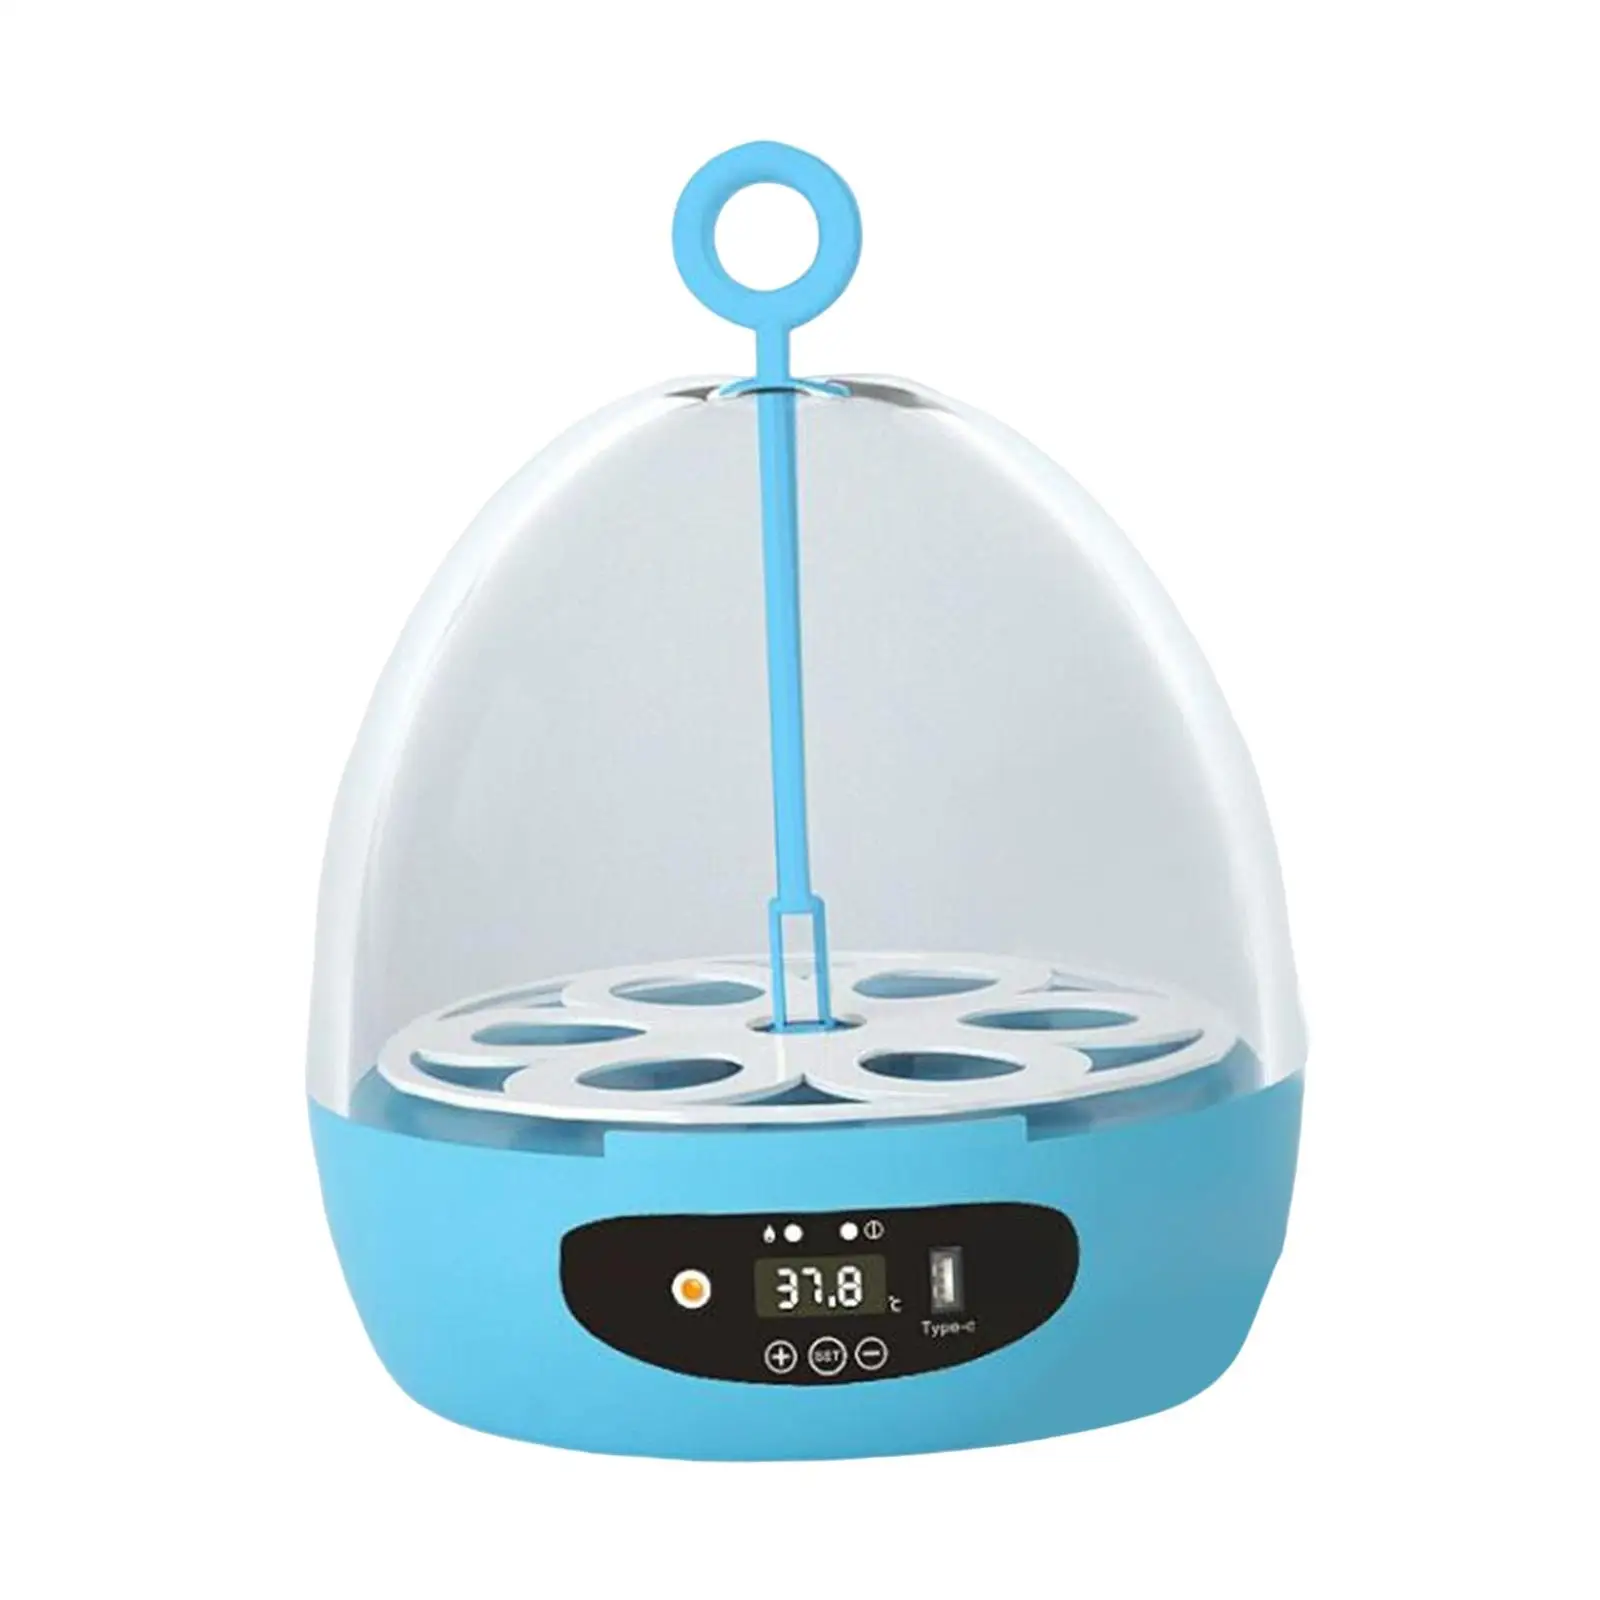 Automatic Eggs Incubator USB Hatcher with Light Temperature Control 6 Eggs Egg Turner Tray for Pigeon Poultry Bird